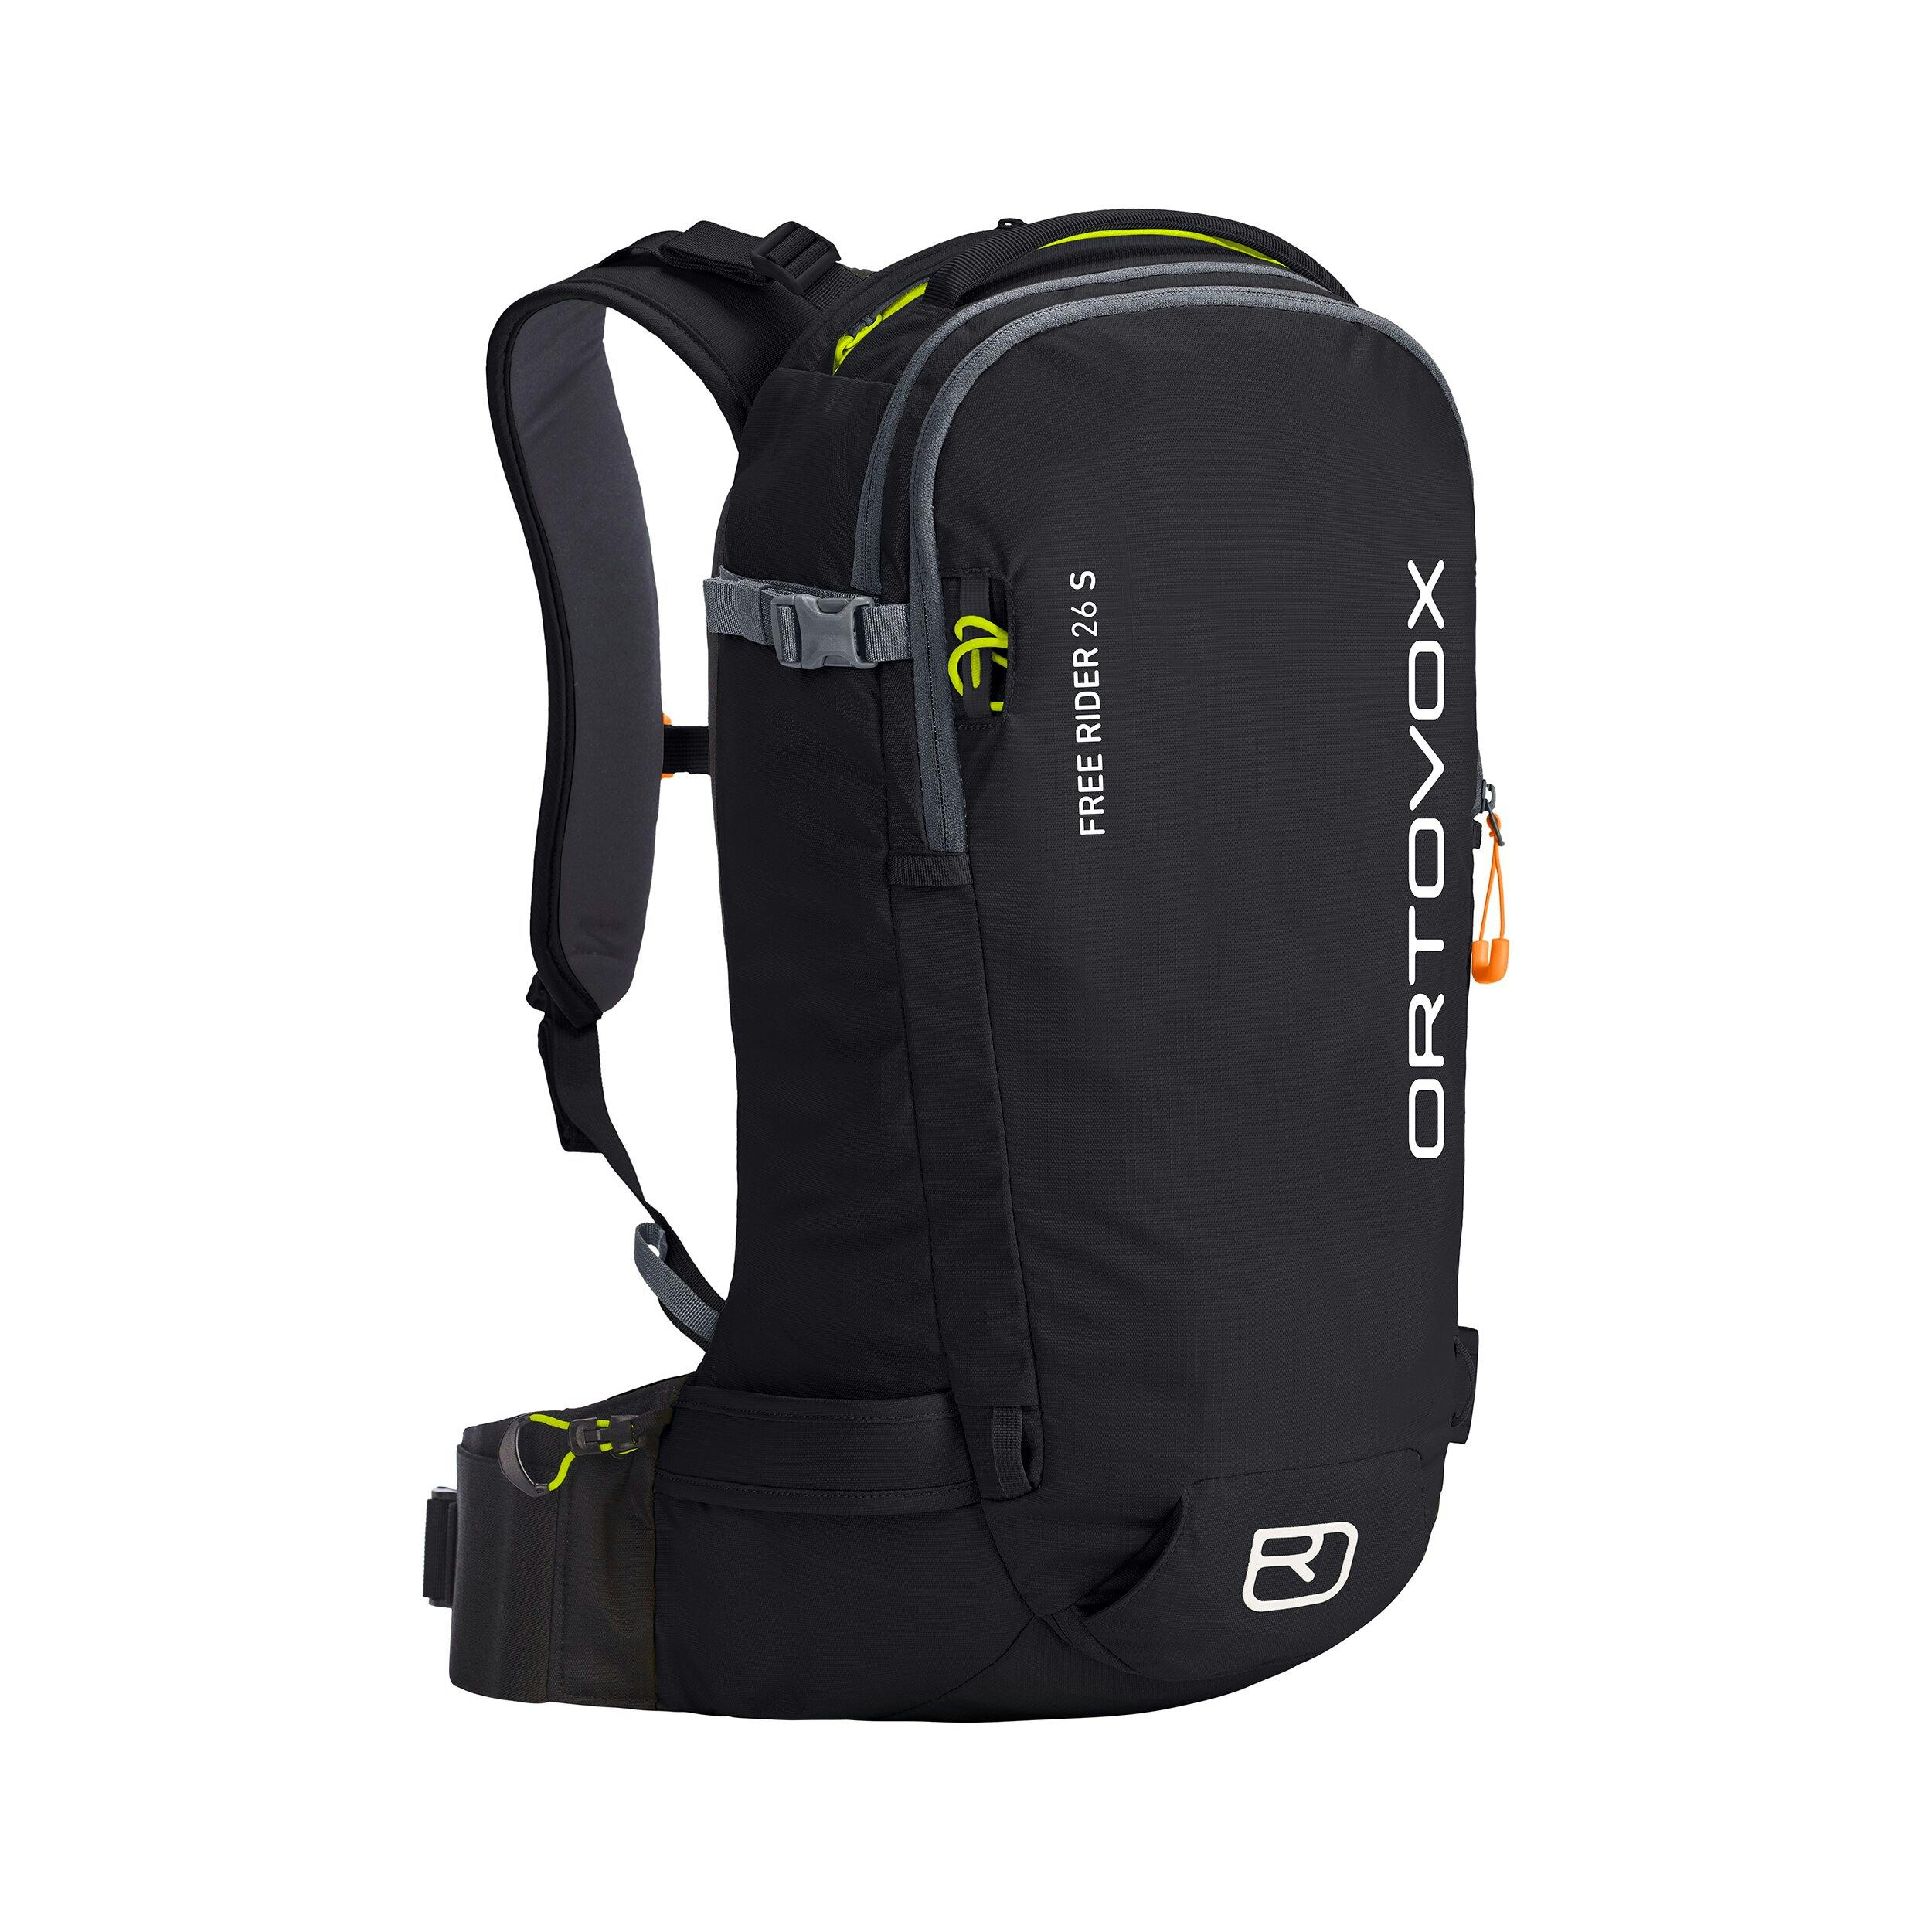 Ortovox Free Rider 26 S Backpack